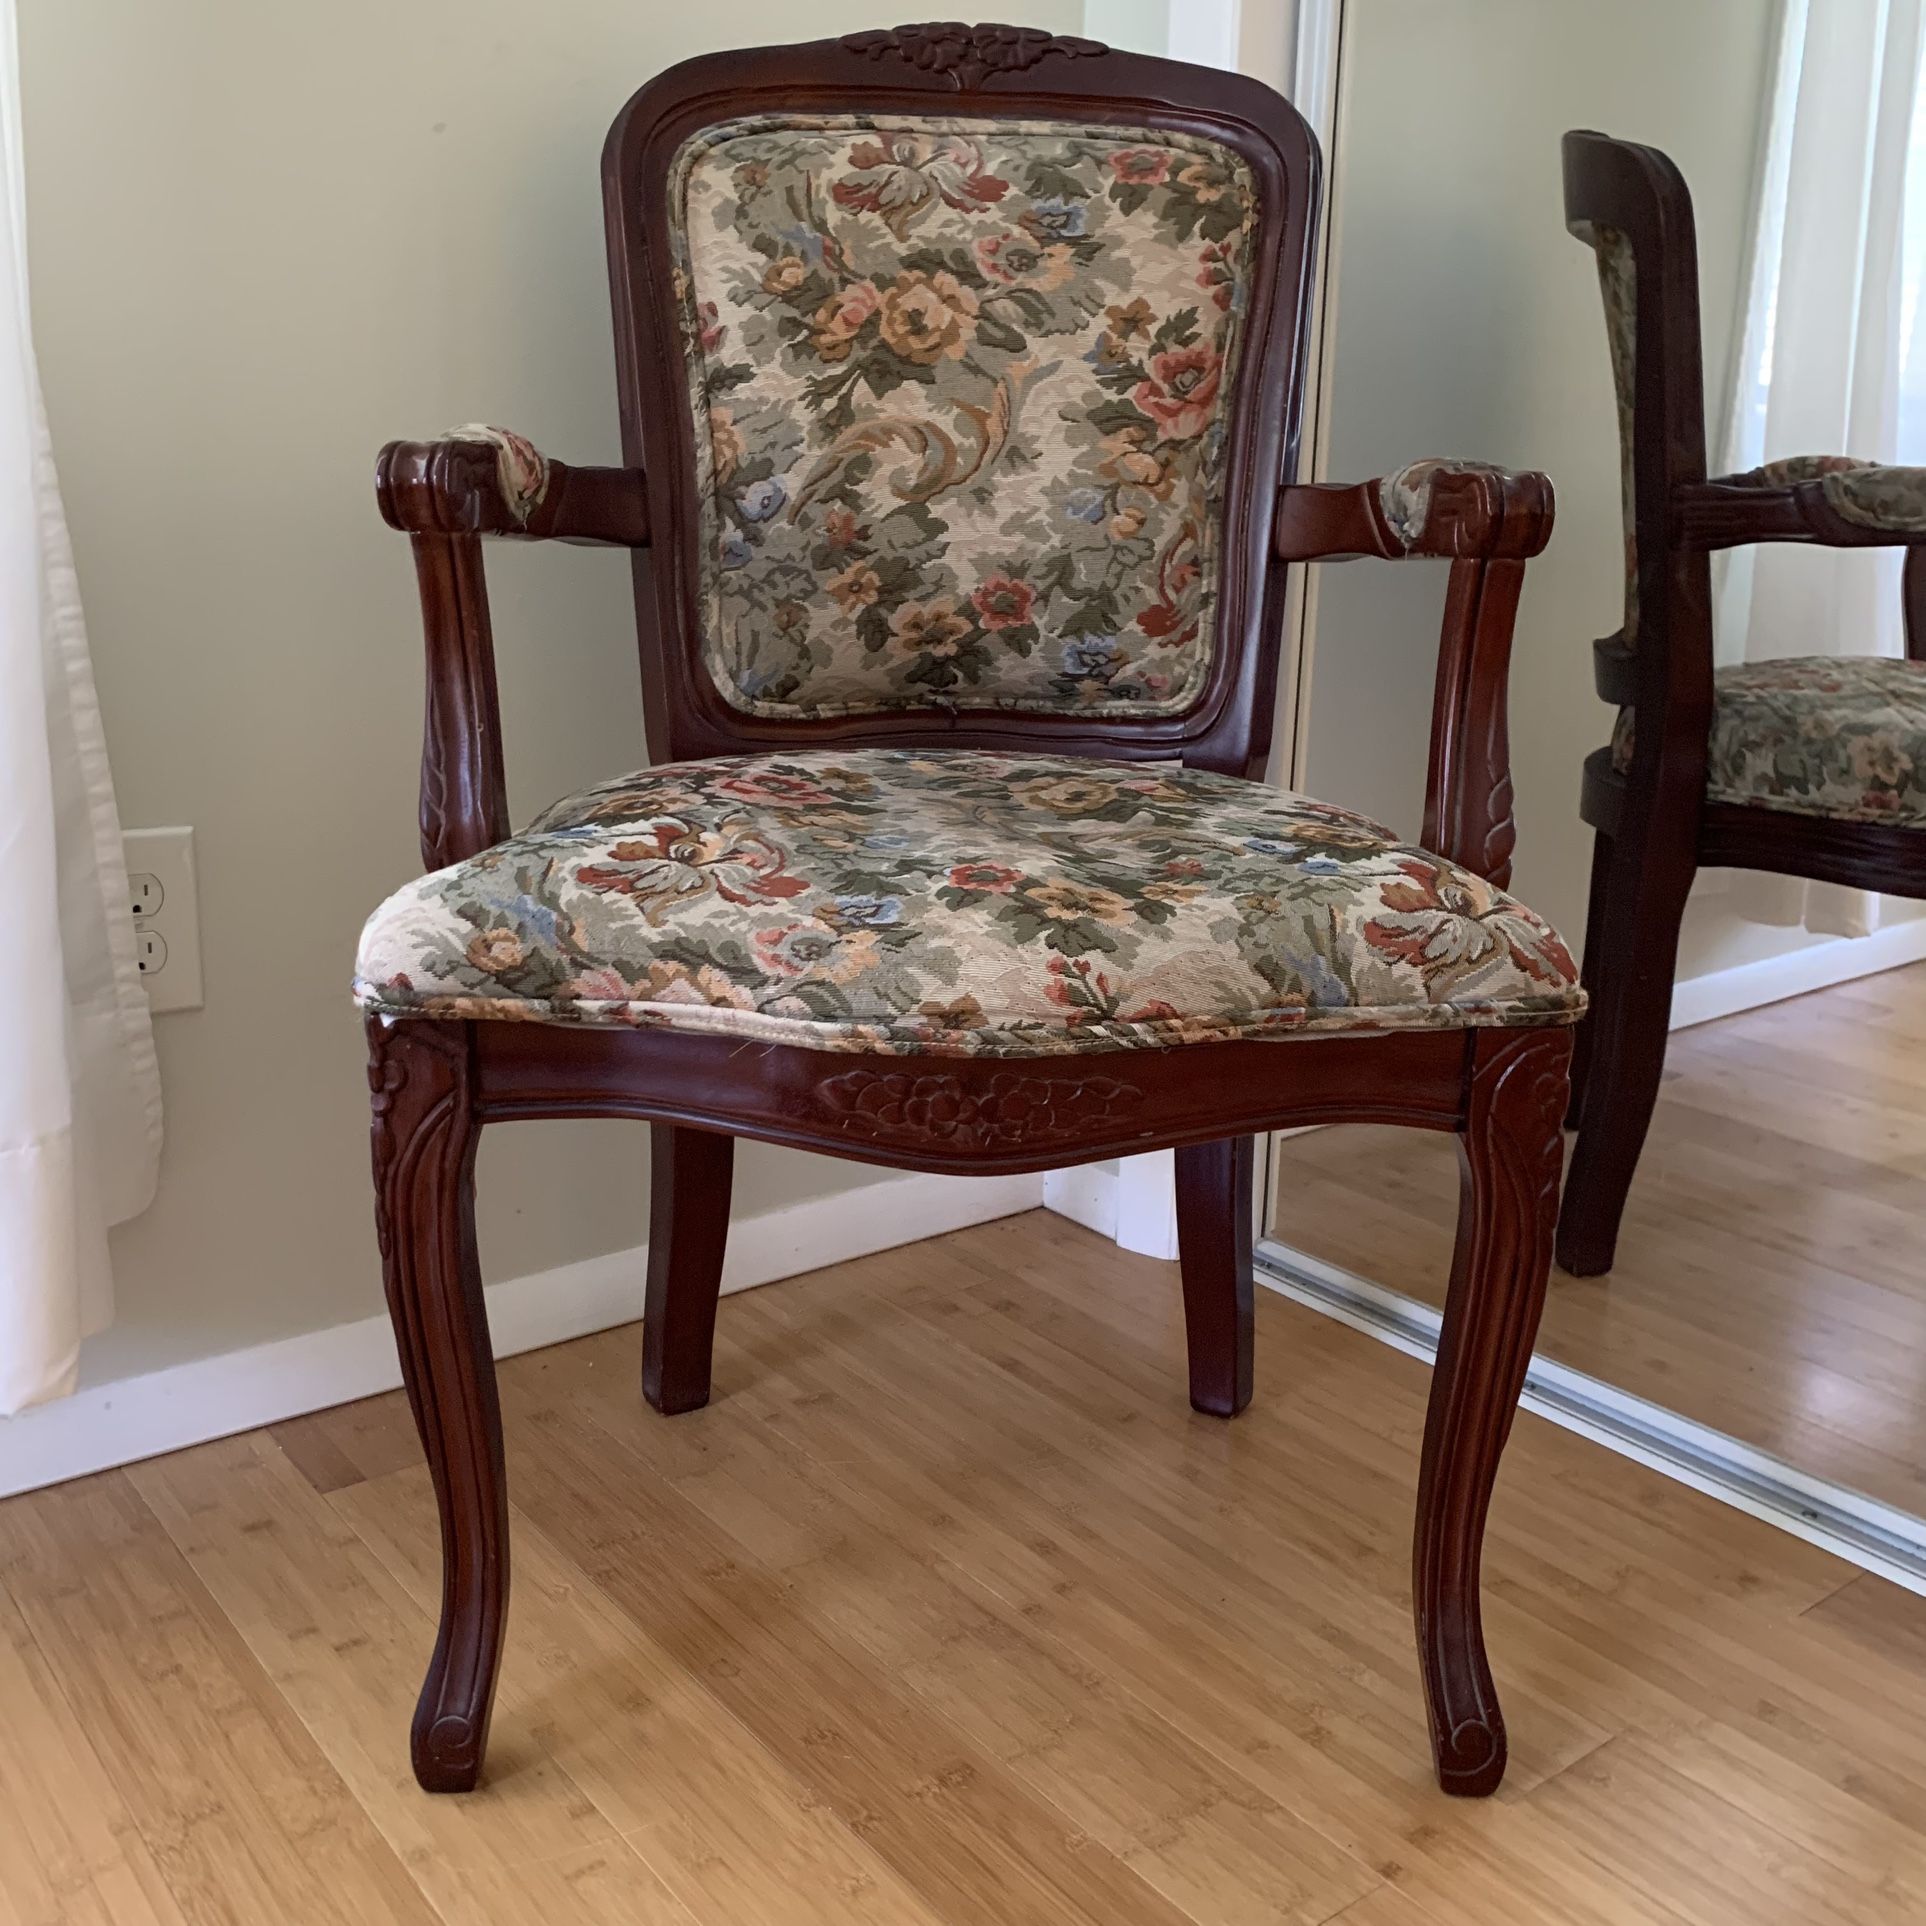 Floral Tapestry Armchair Vintage European style - Best Offer 